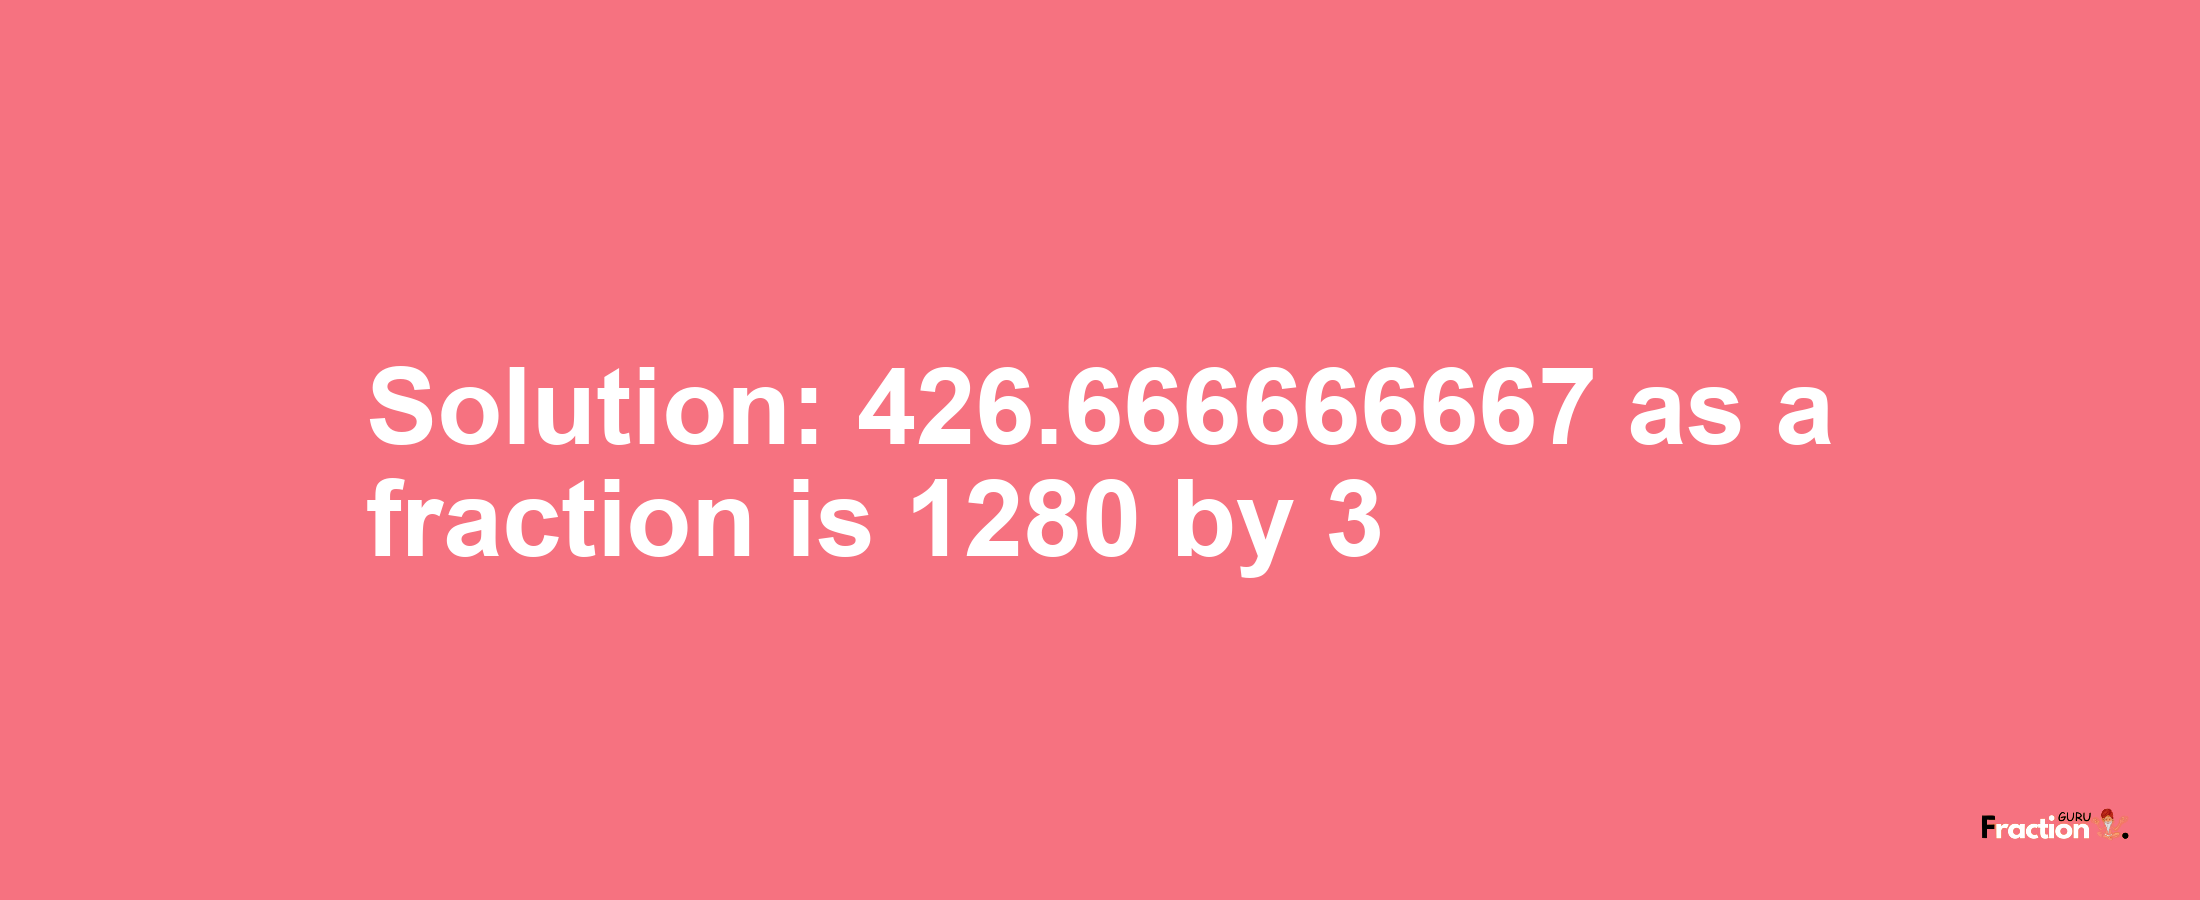 Solution:426.666666667 as a fraction is 1280/3